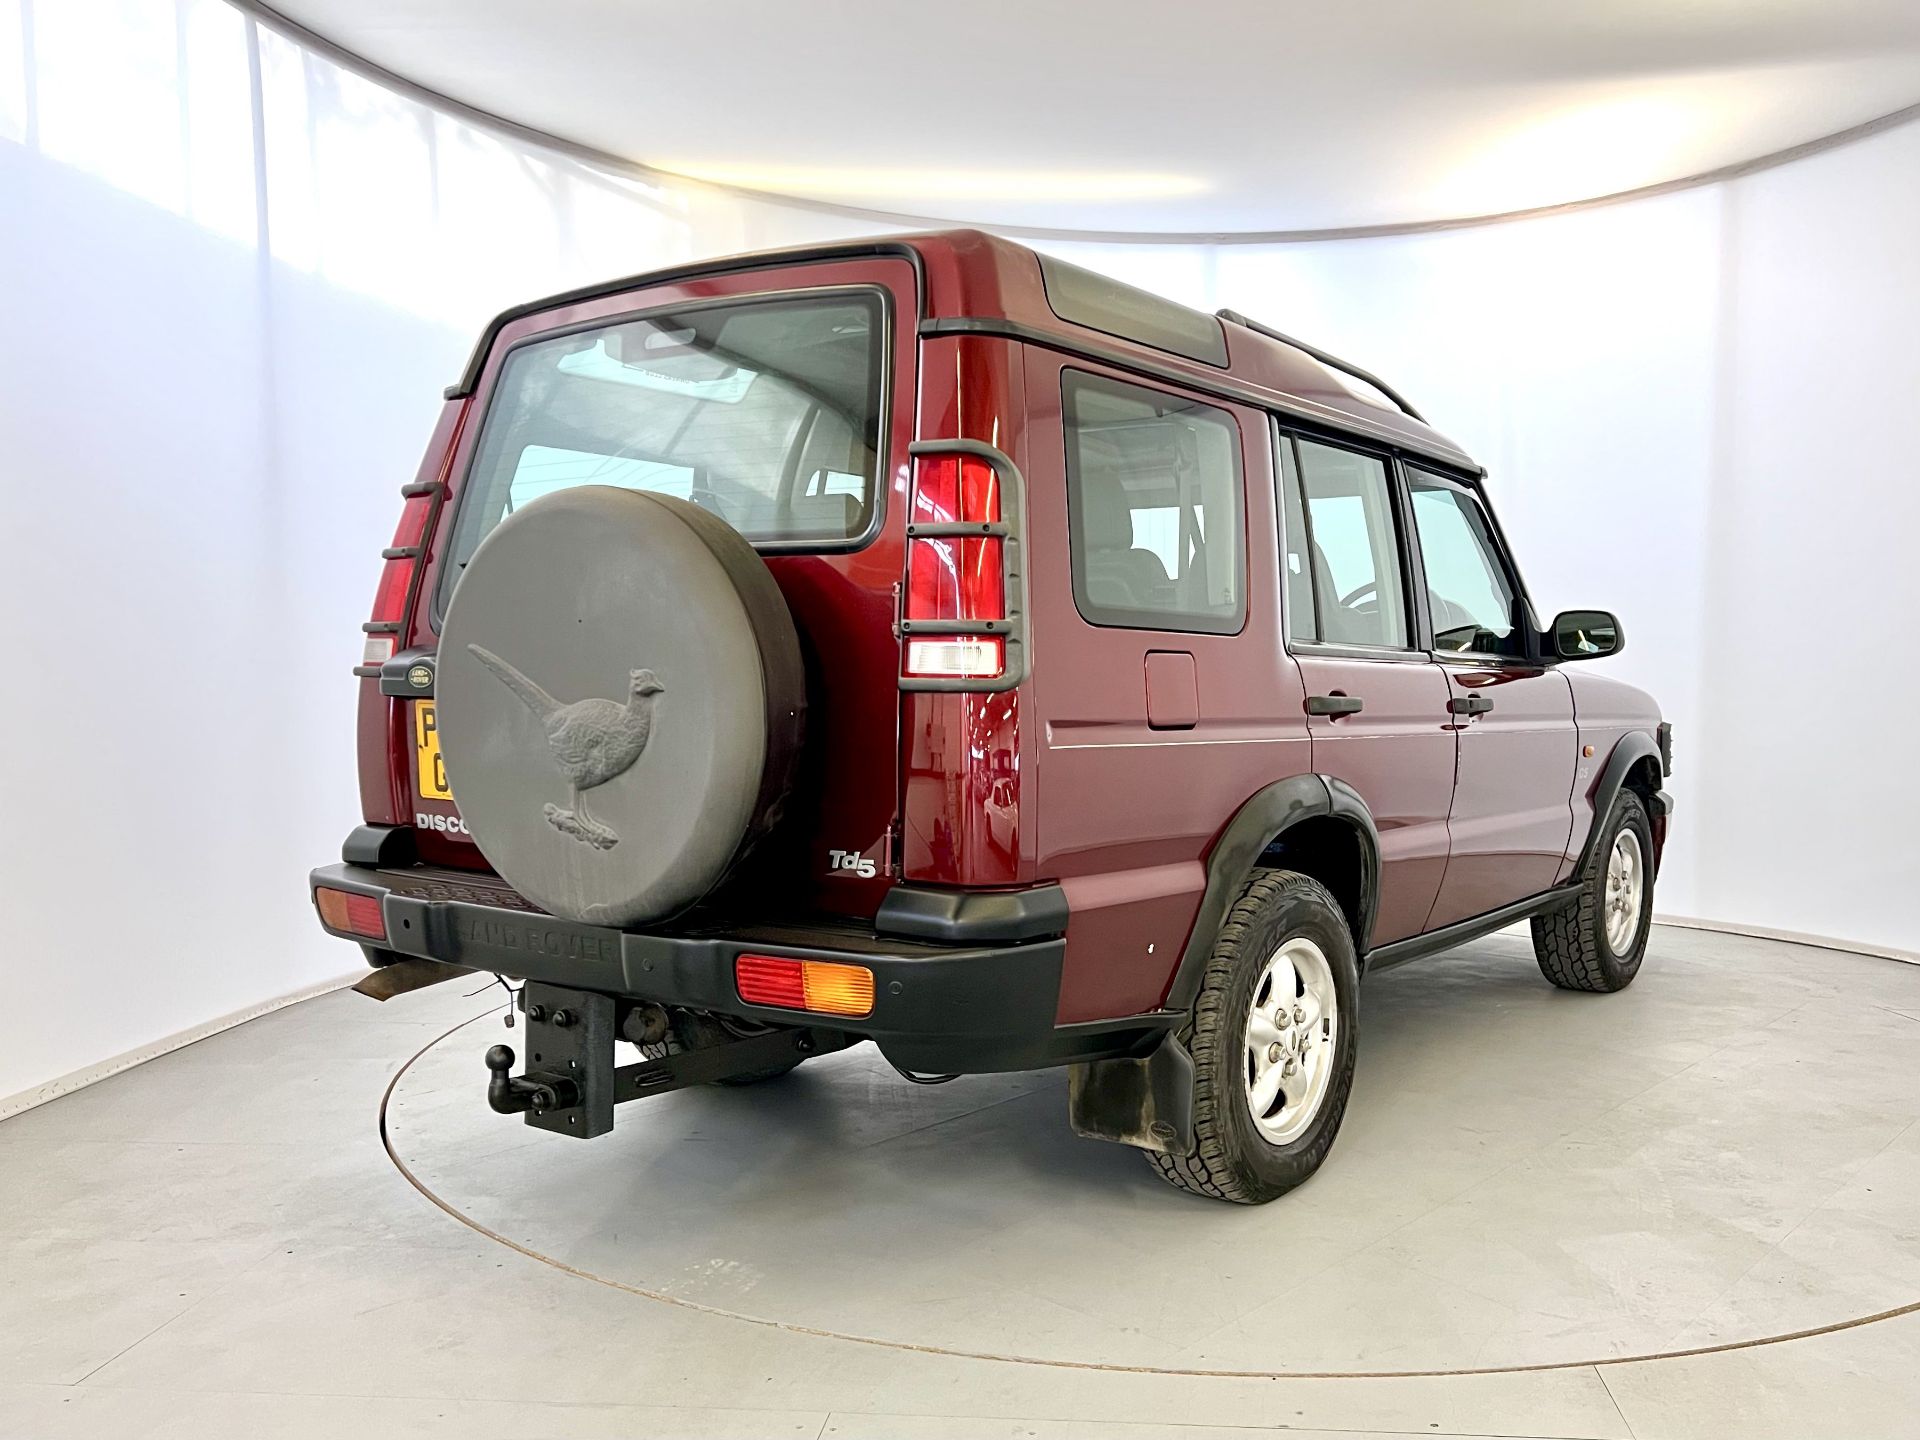 Land Rover Discovery - Image 9 of 35